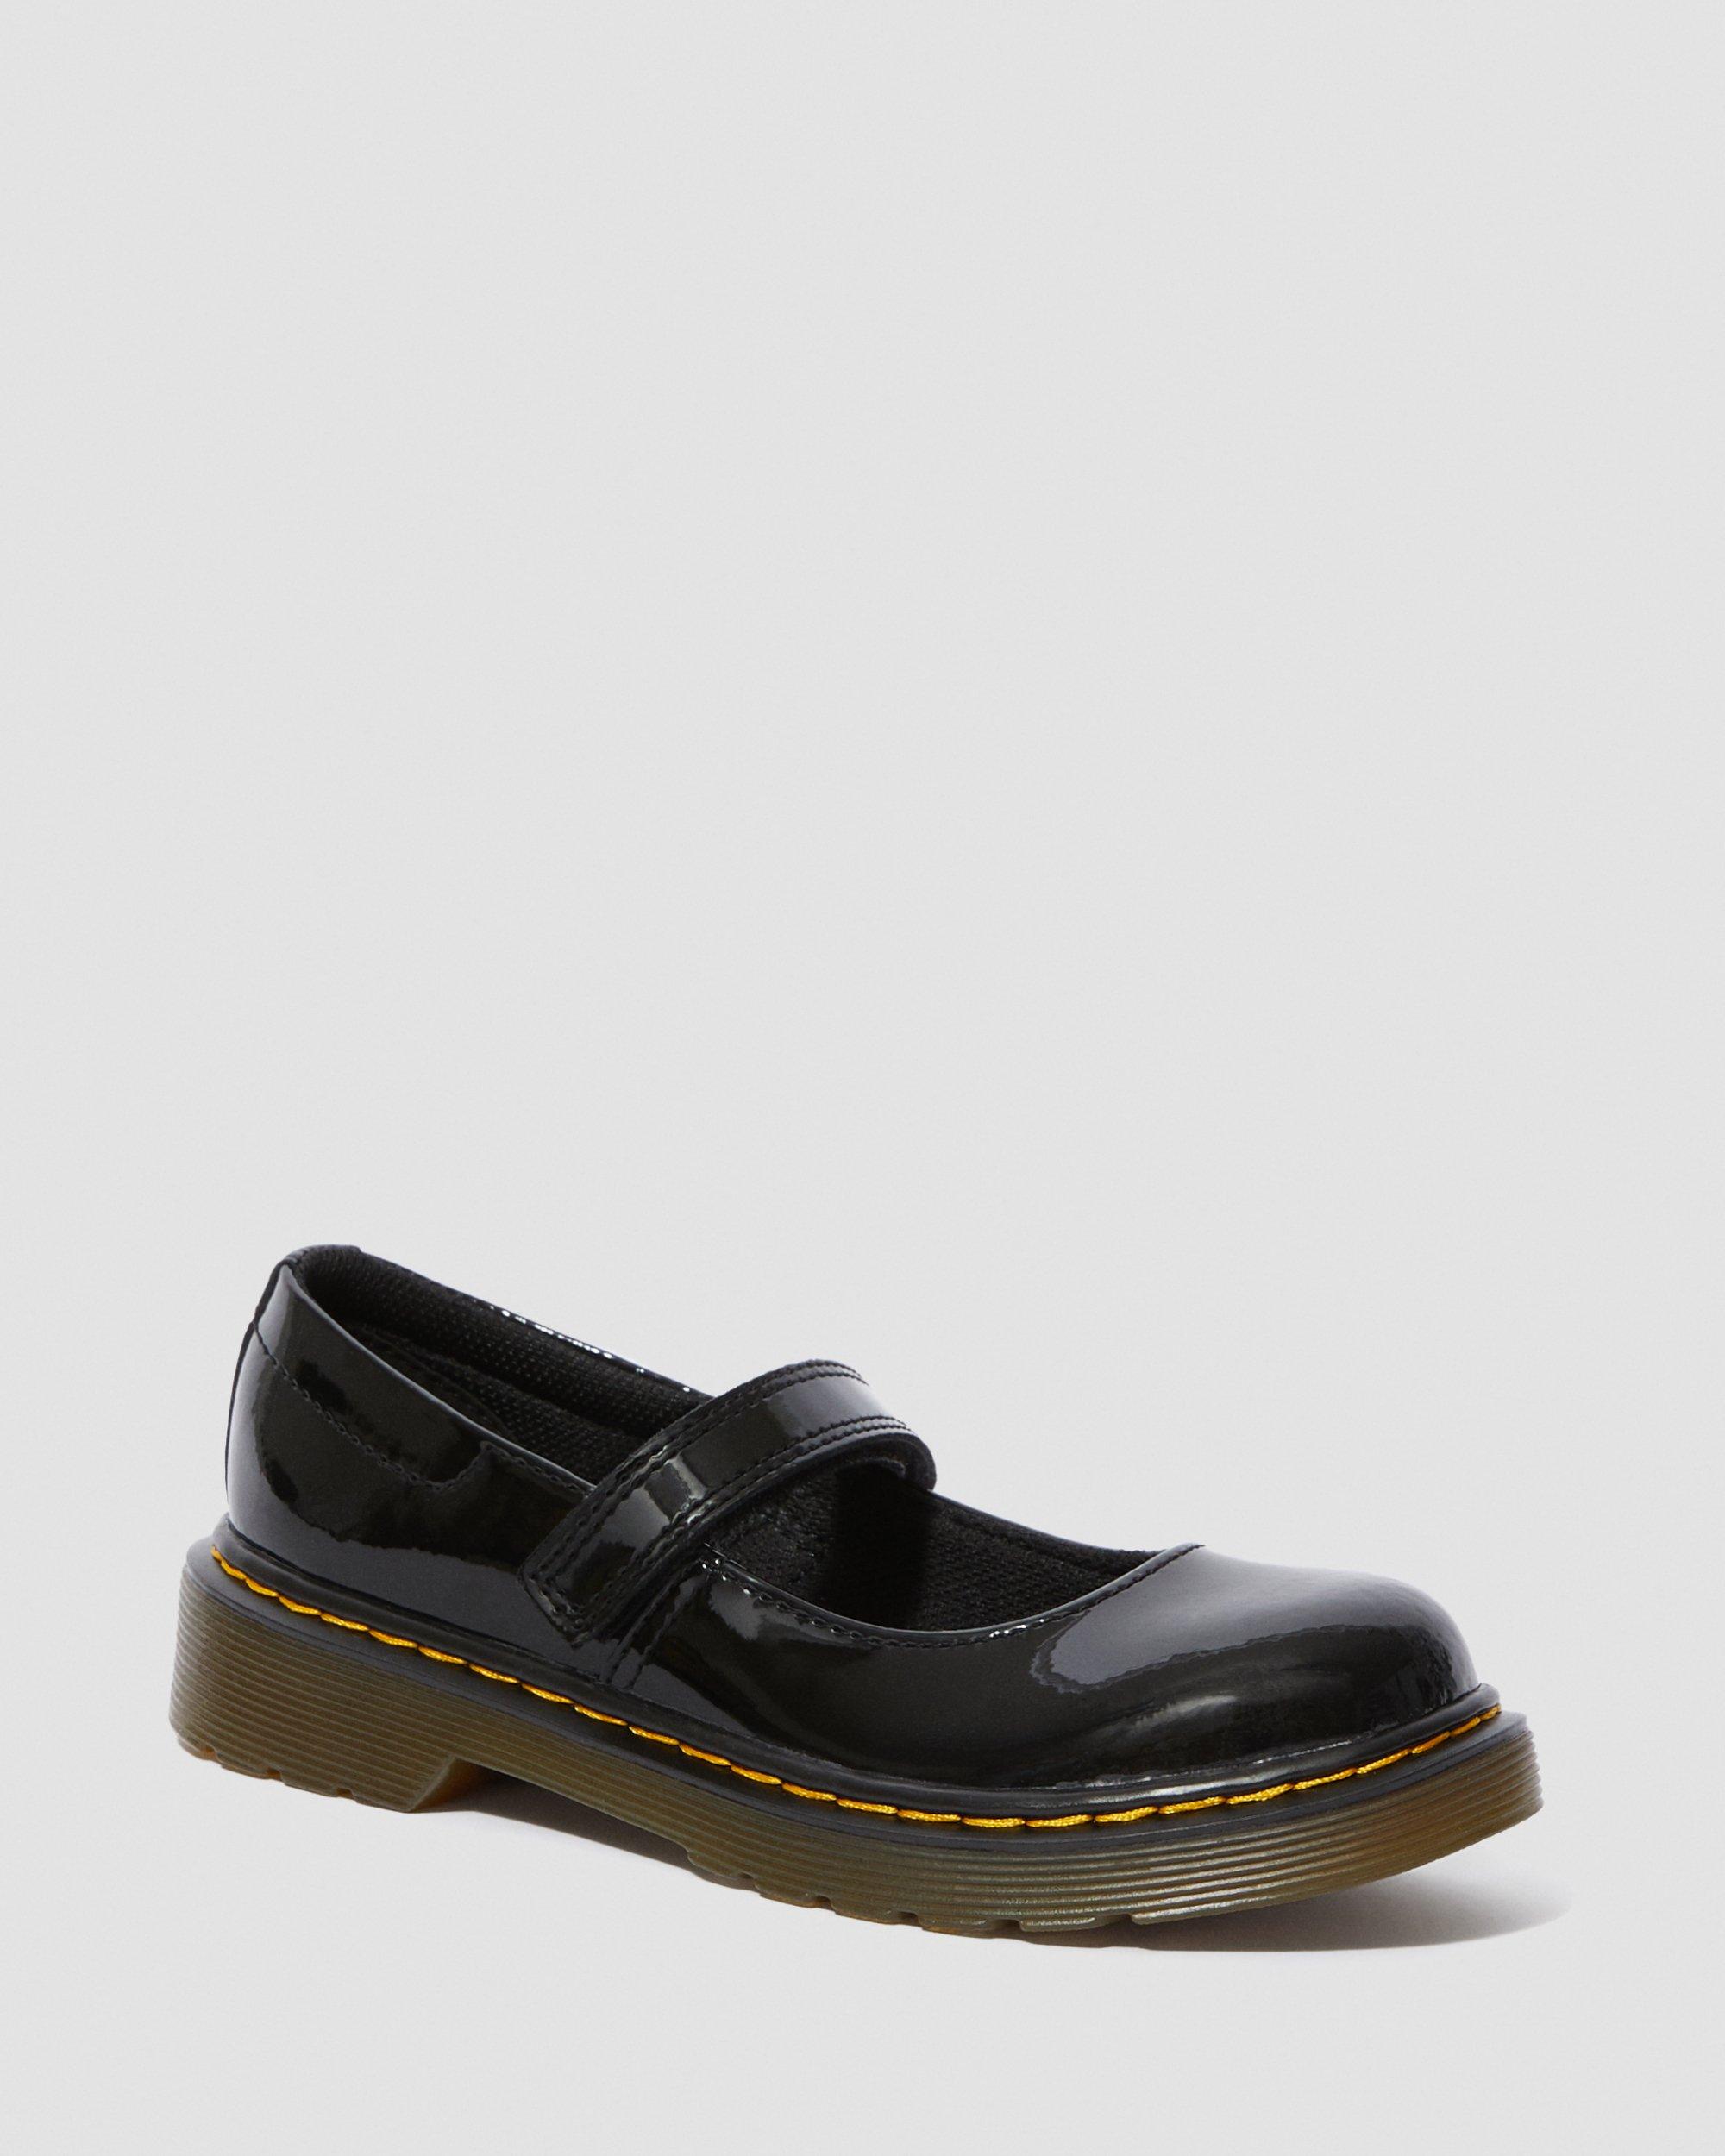 Junior Maccy Patent Leather Mary Jane Shoes